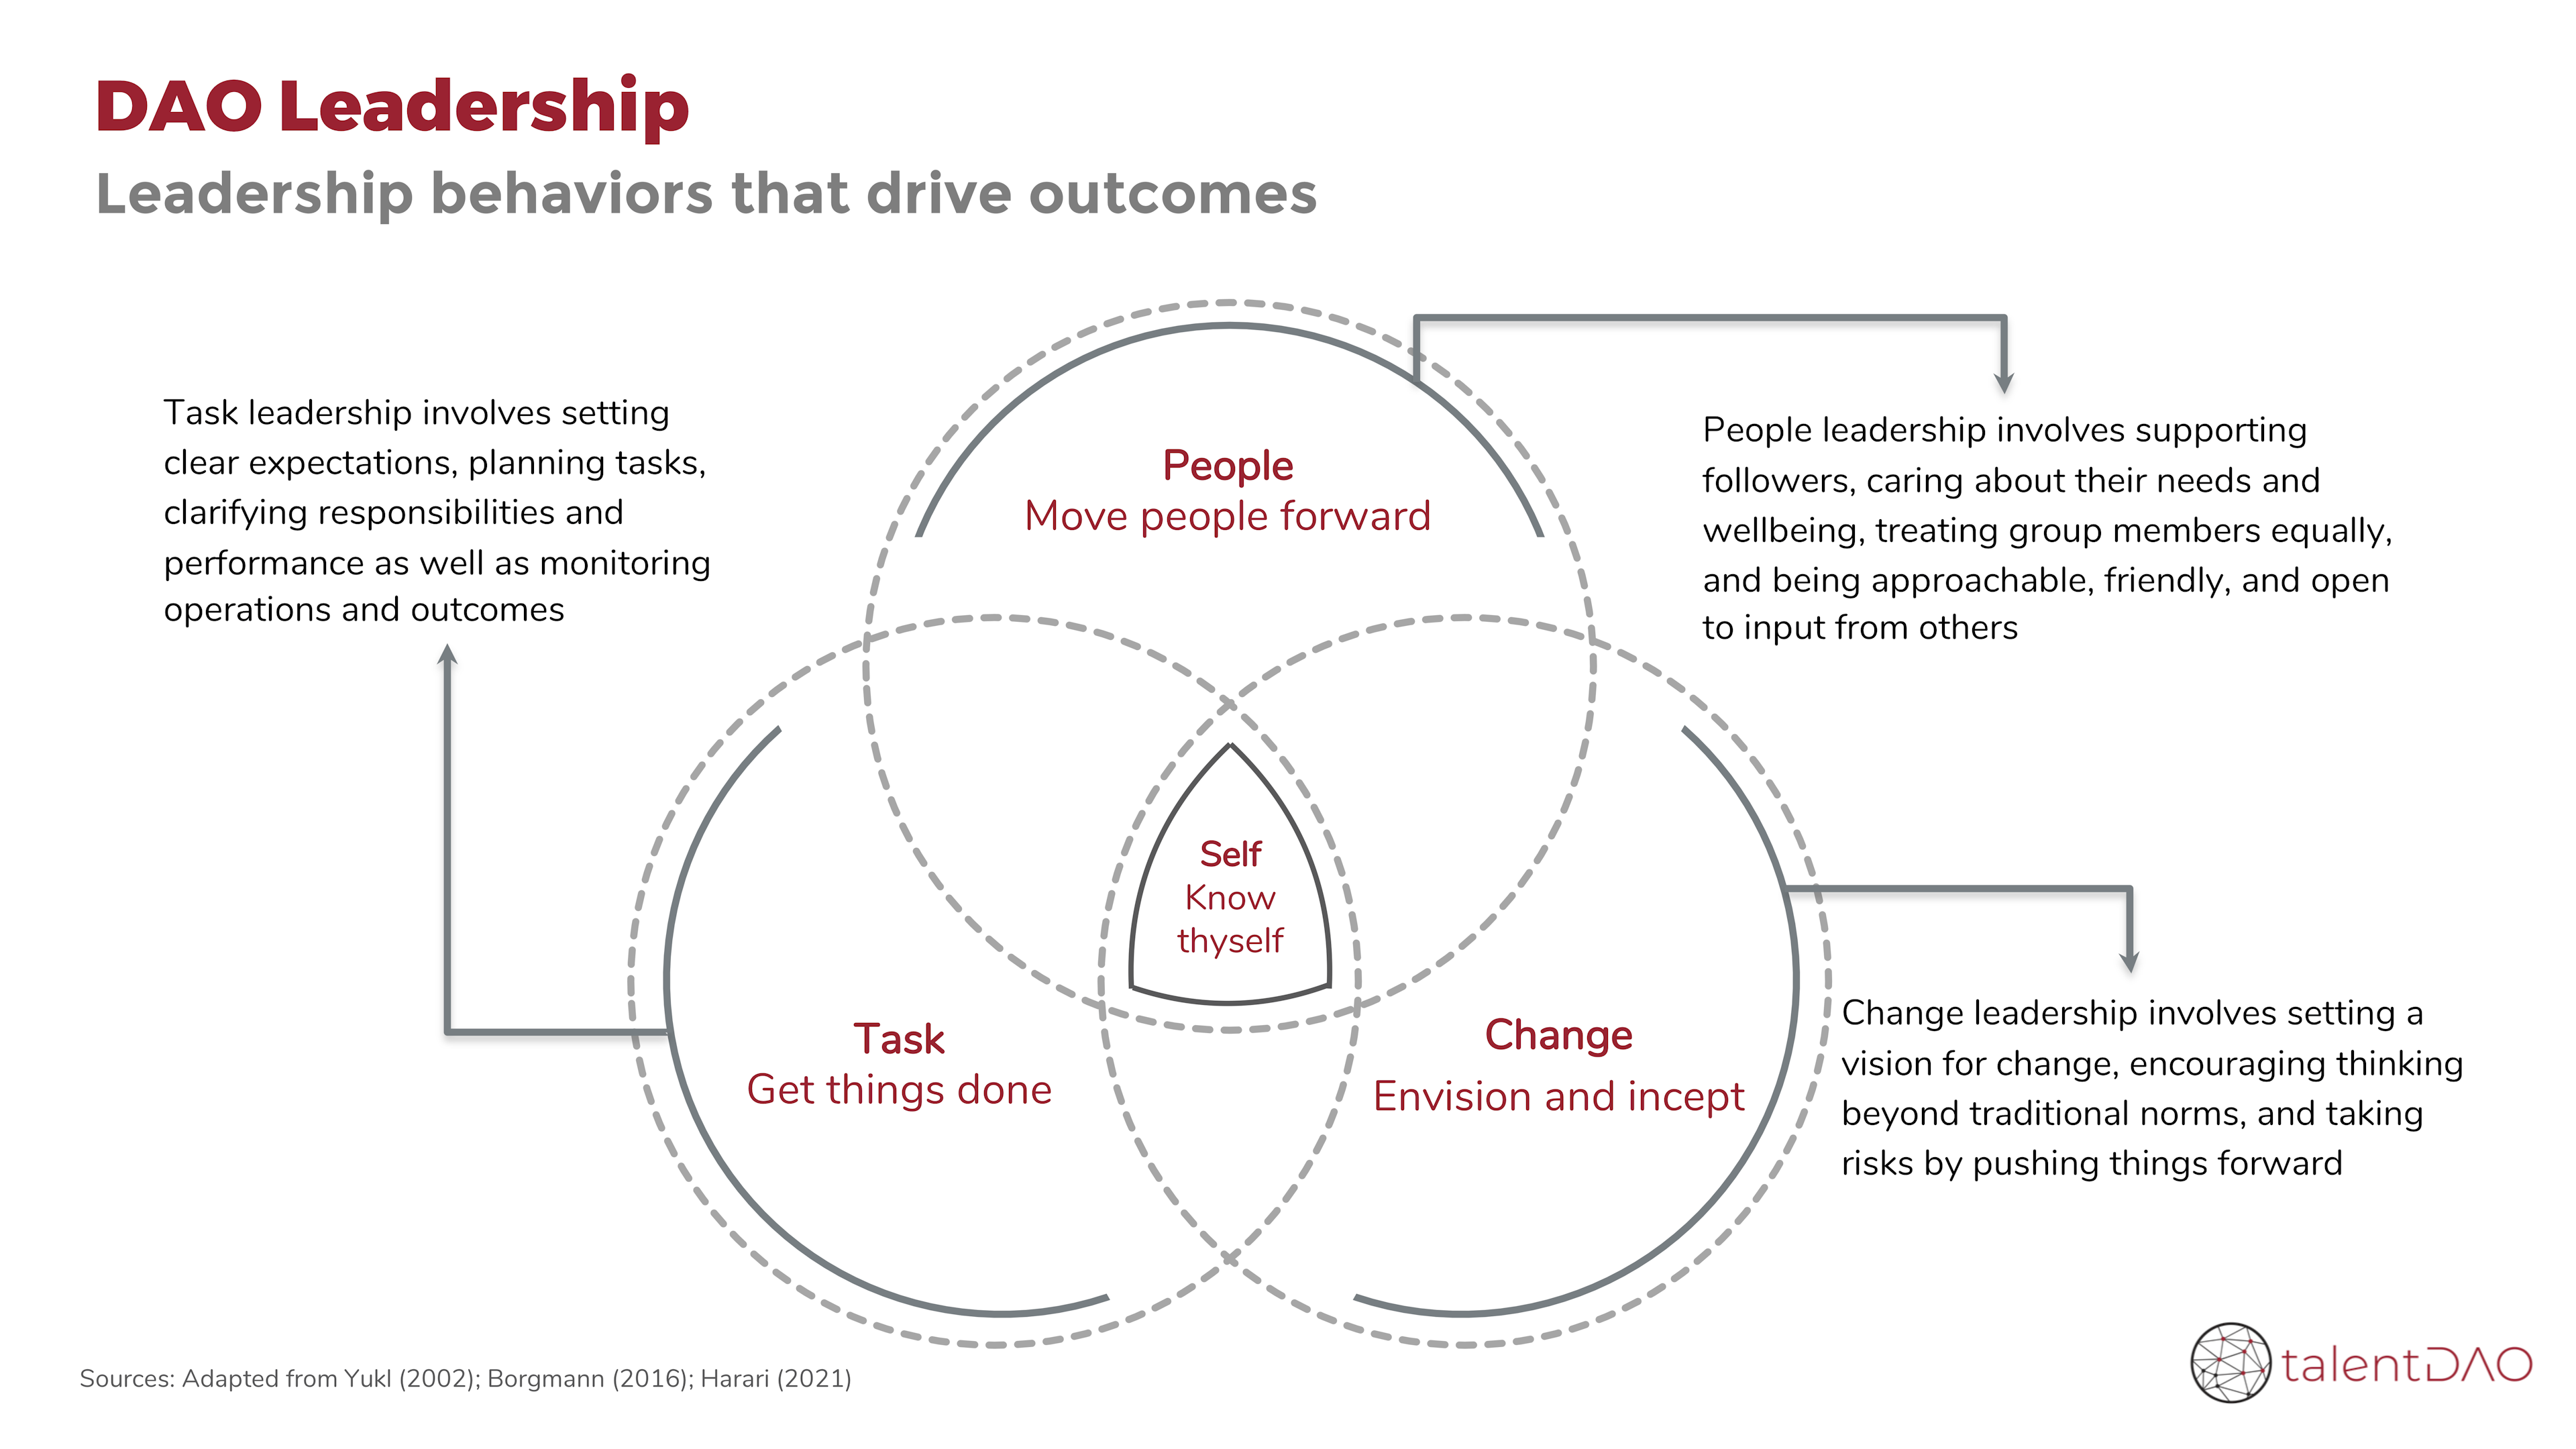 Categories of leadership behaviors that drive individual and organizational outcomes